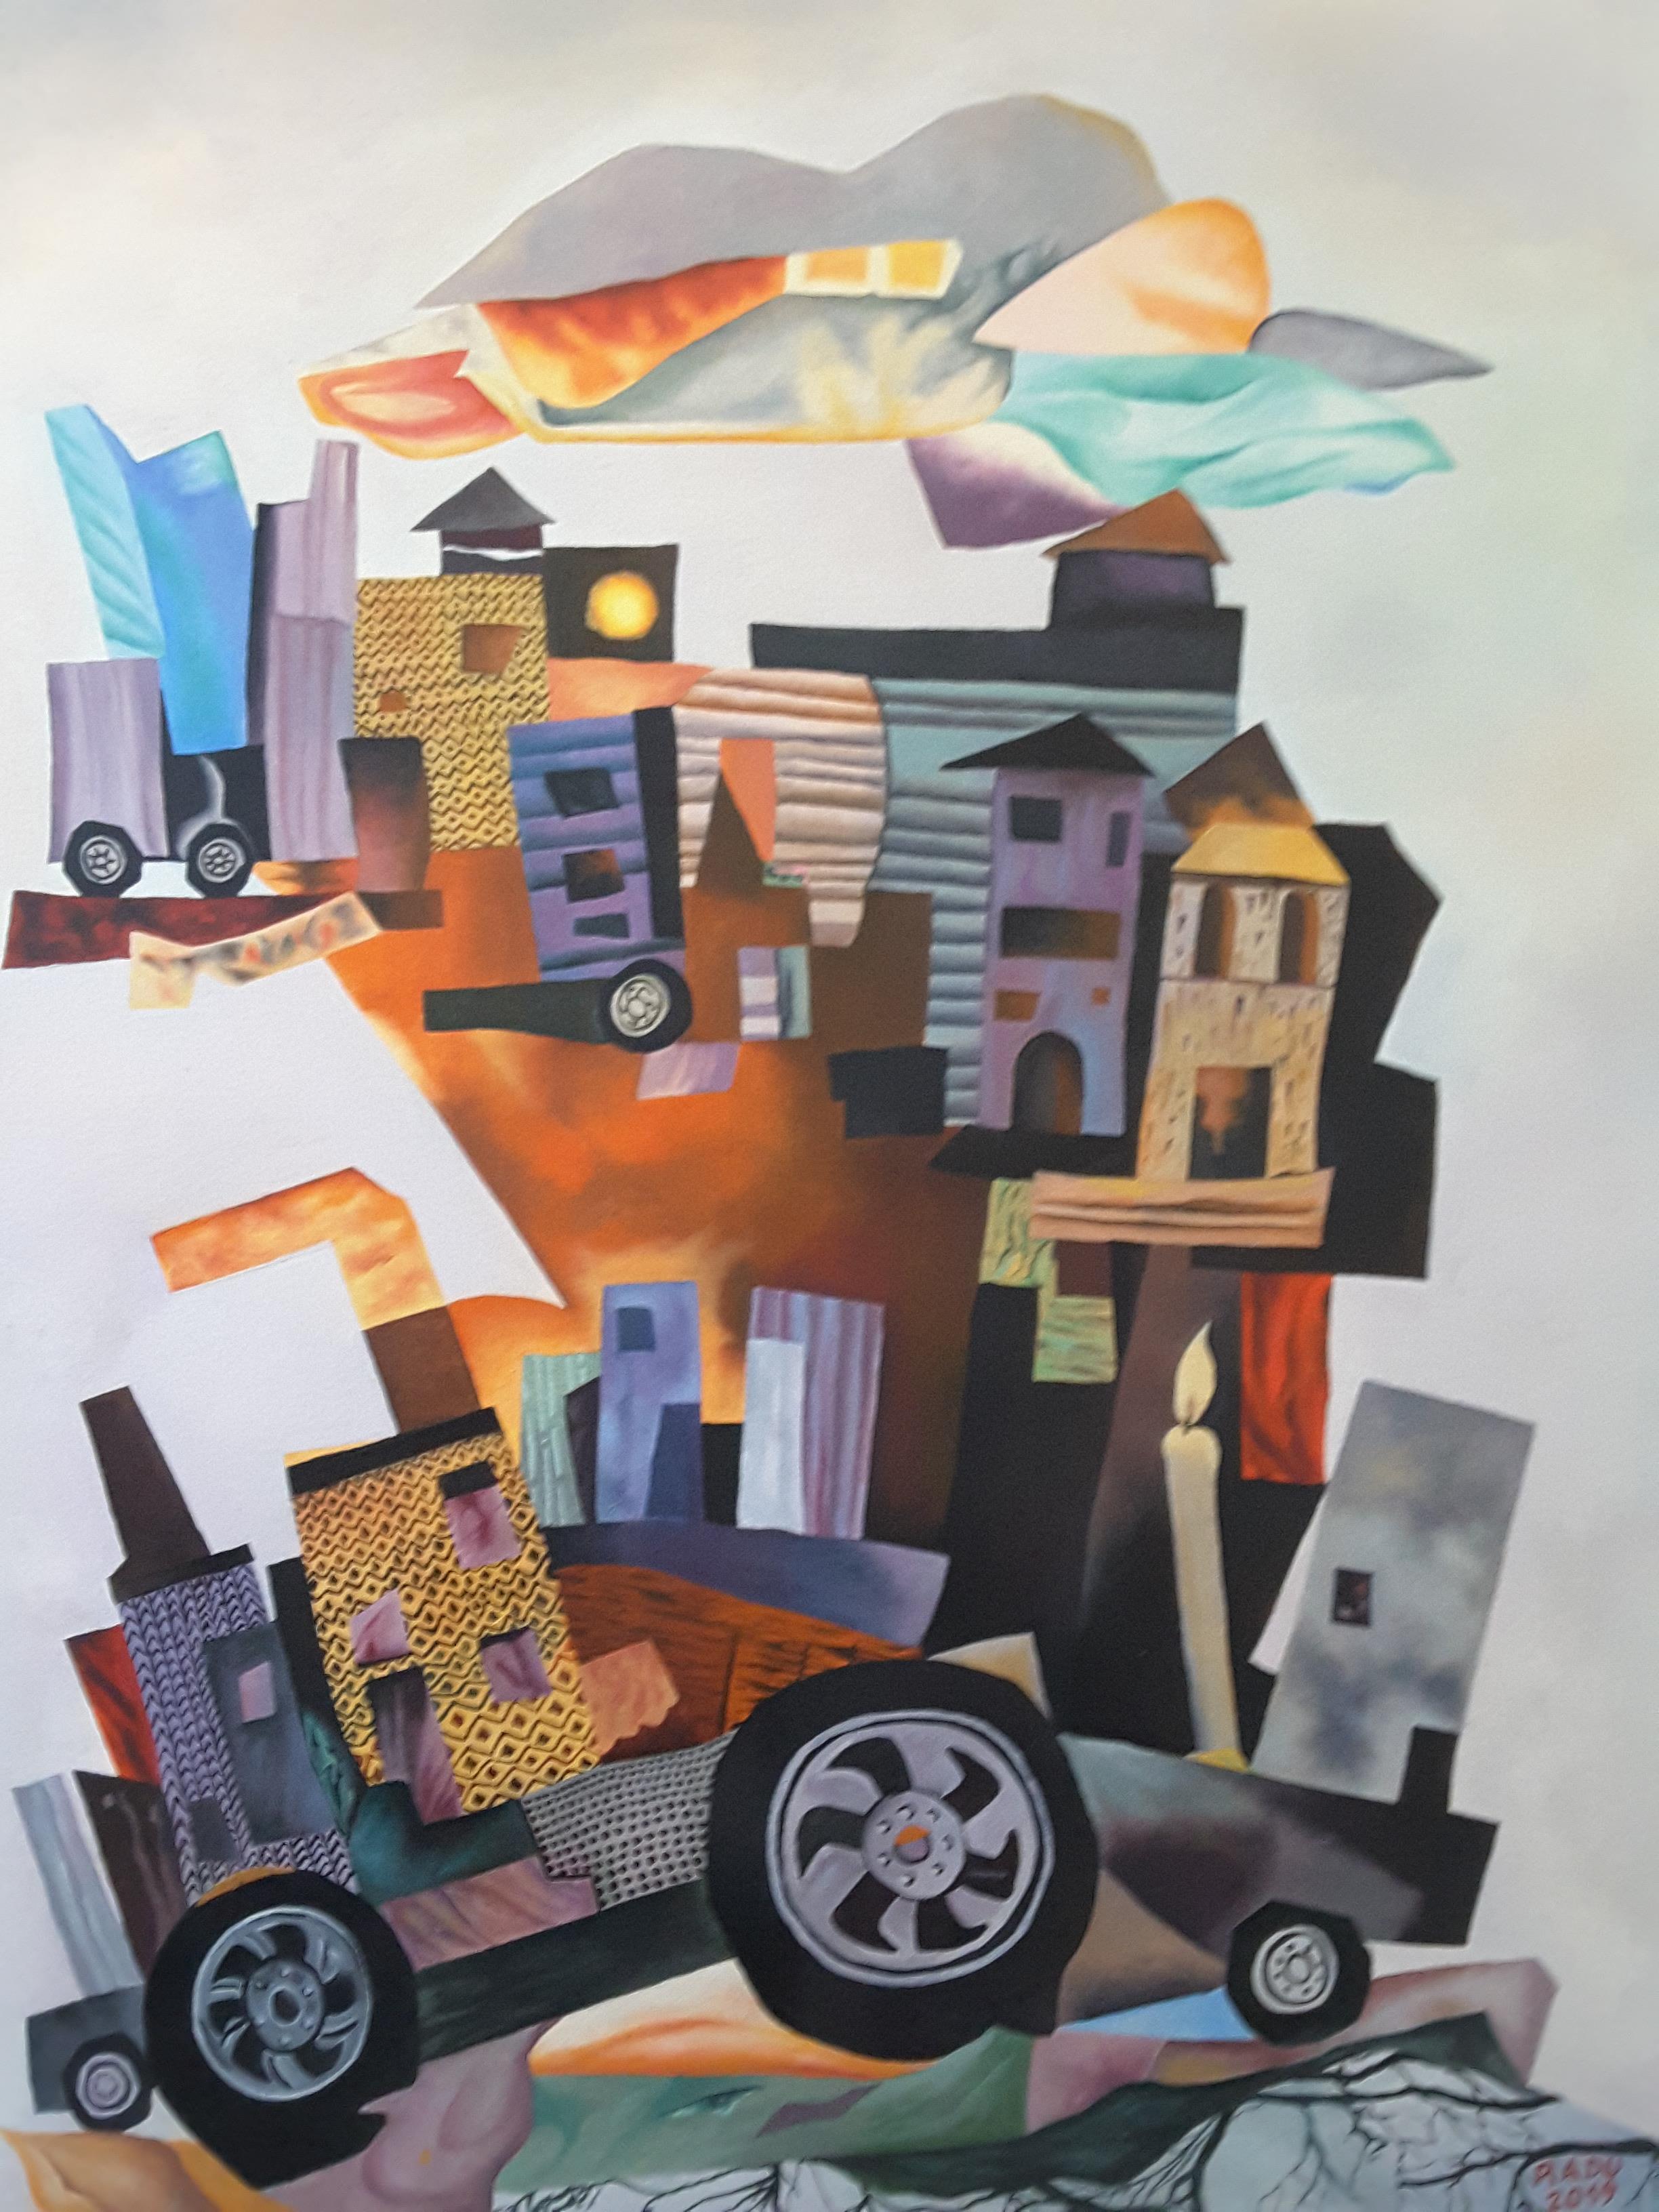 Radu Priscu, "Our everyday life", oil on canvas, 76 x 101cm, c. 2019. Our everyday life,